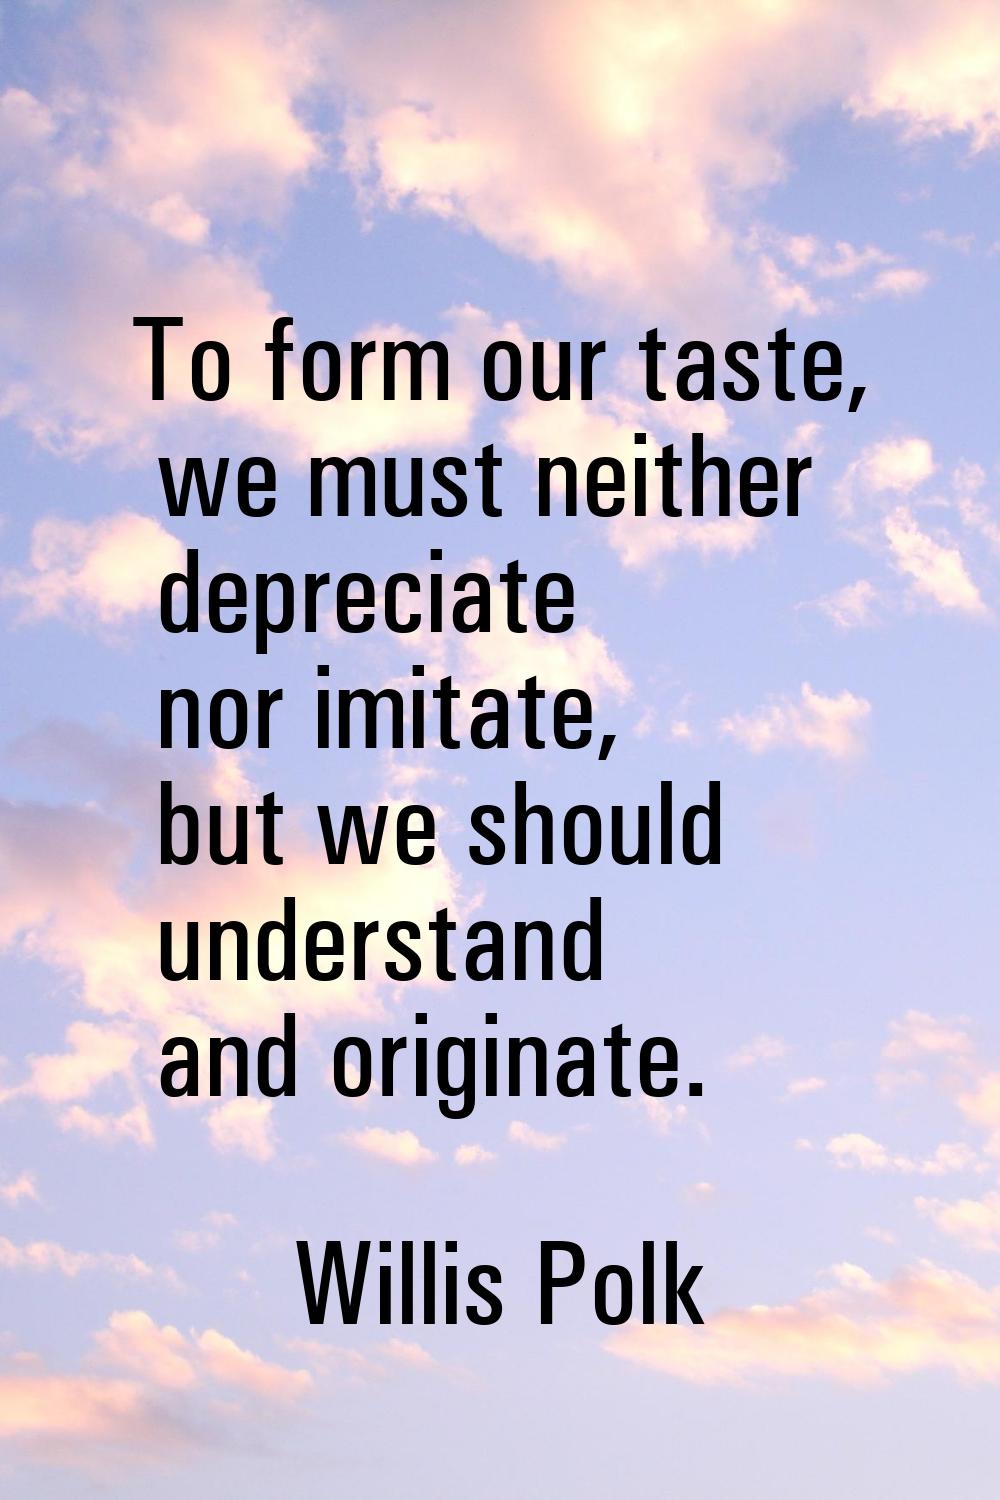 To form our taste, we must neither depreciate nor imitate, but we should understand and originate.